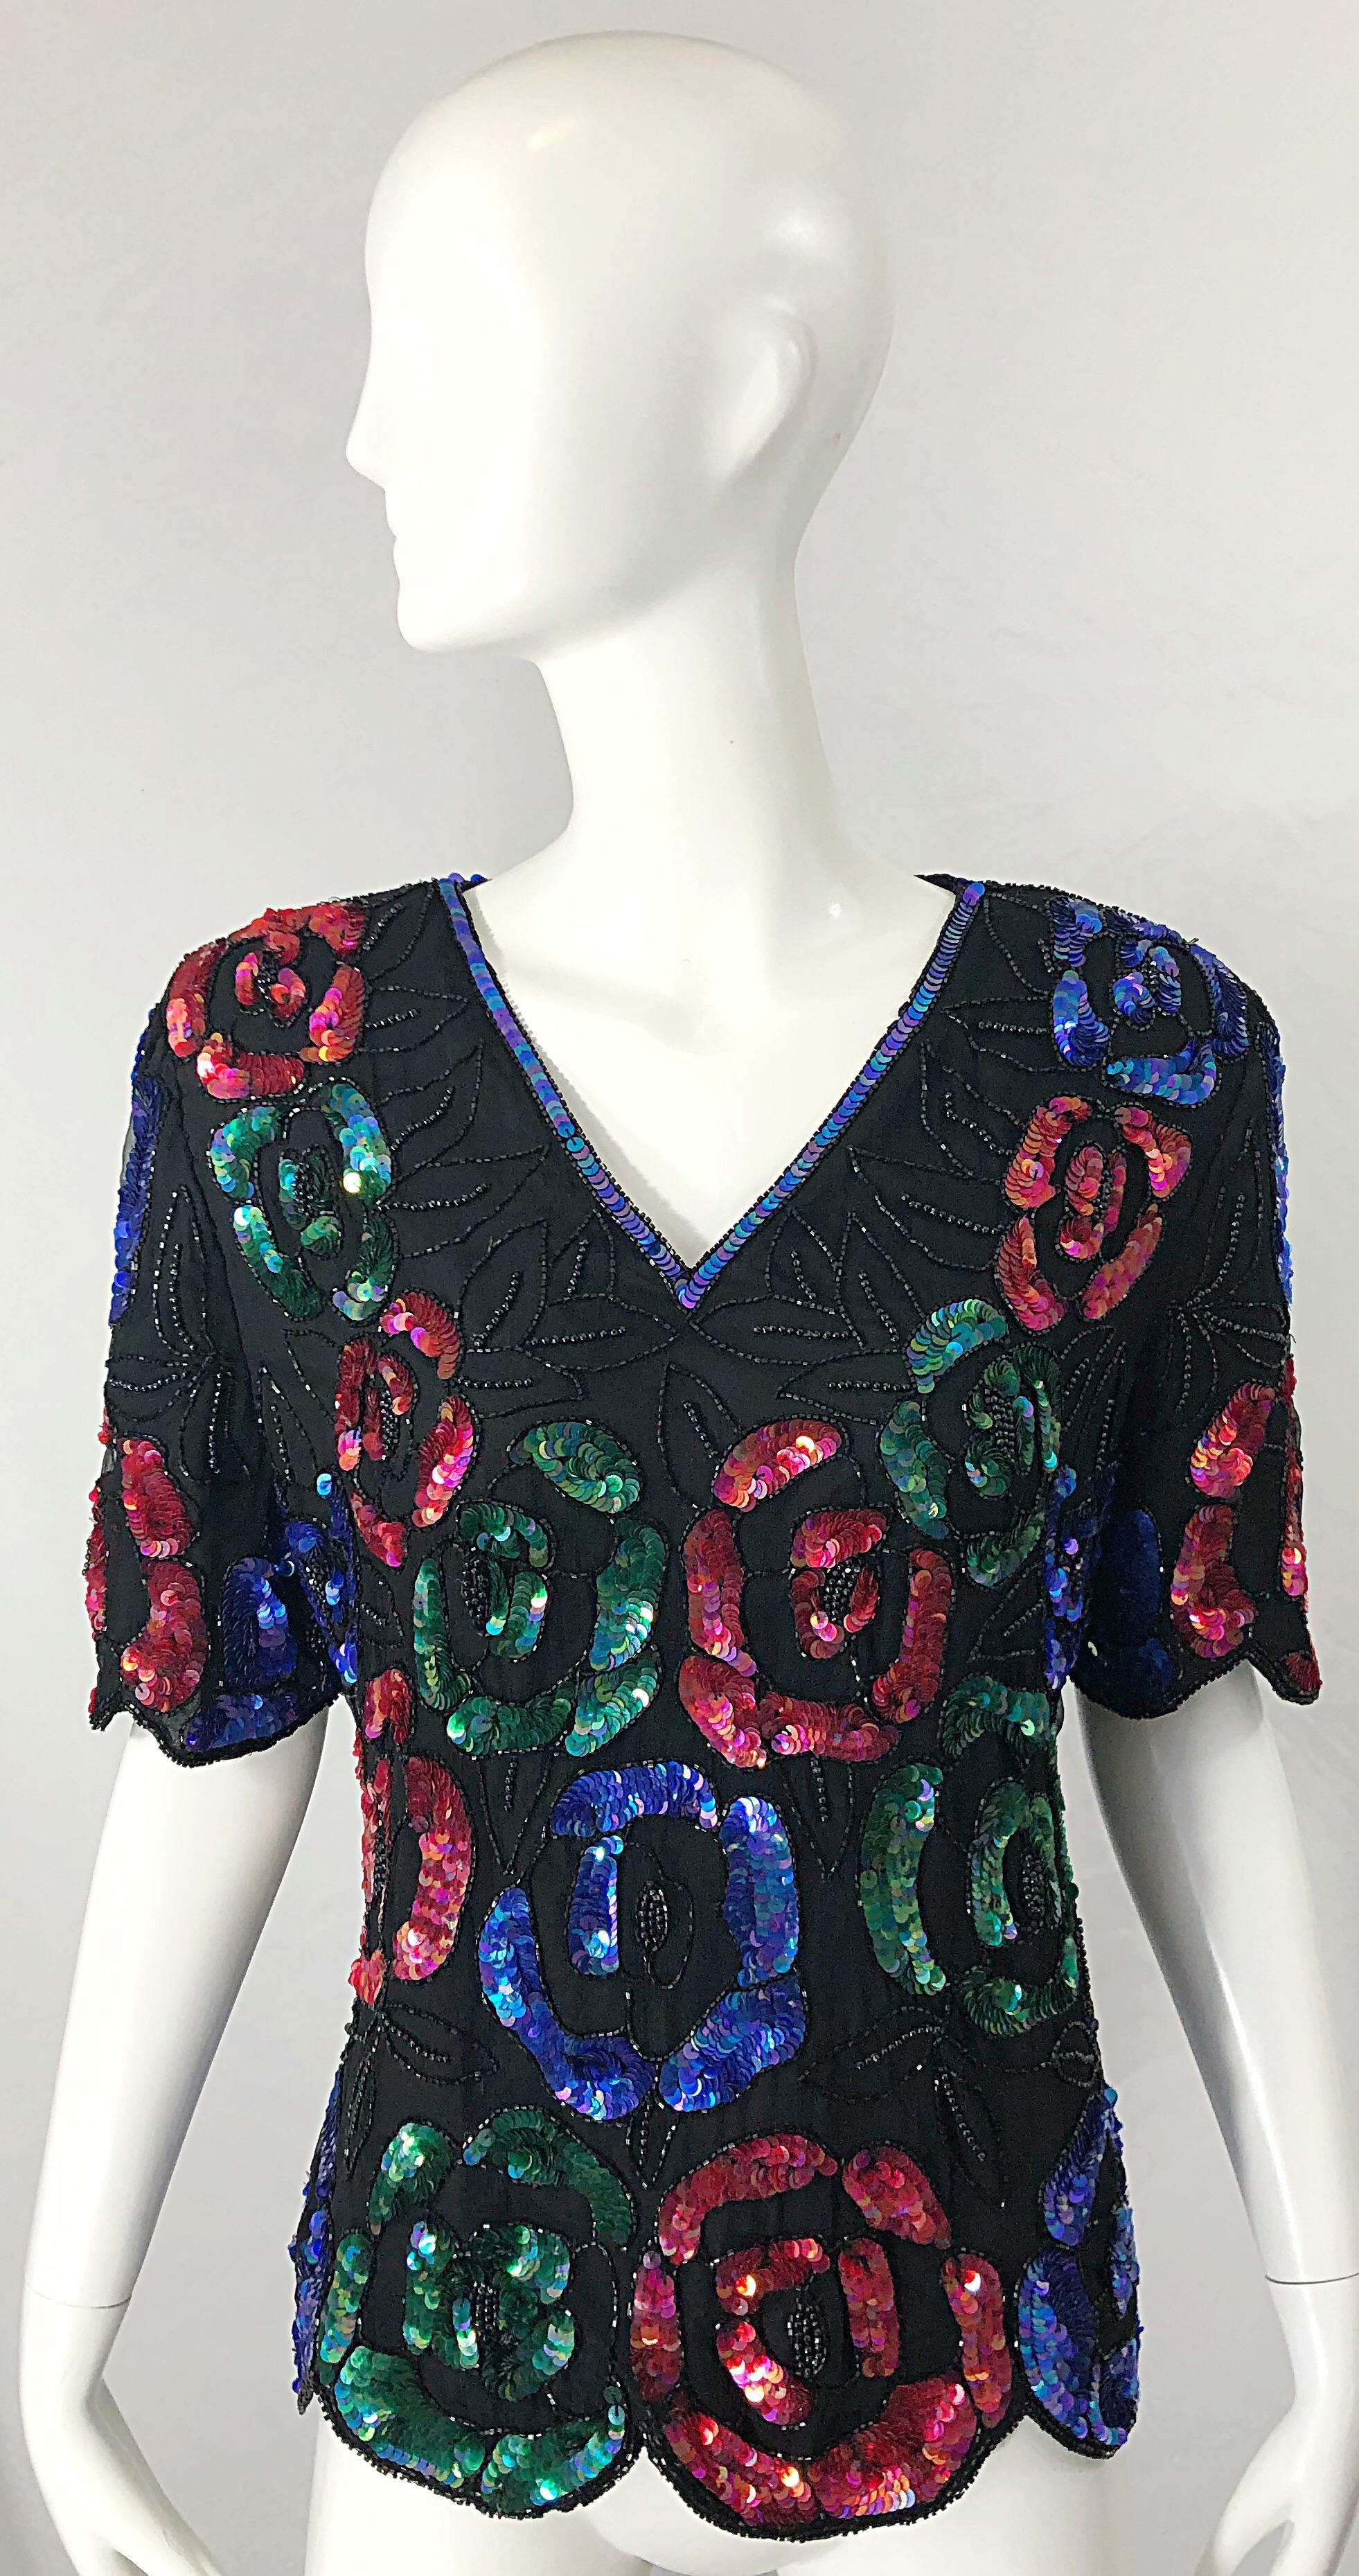 Beautiful early 90s black silk chiffon beaded and sequined blouse top ! Features thousands of hand-sewn sequins and beads throughout. Colorful flowers in red, blue and green with Iridescent sequins around the collar. Hidden zipper up the back with